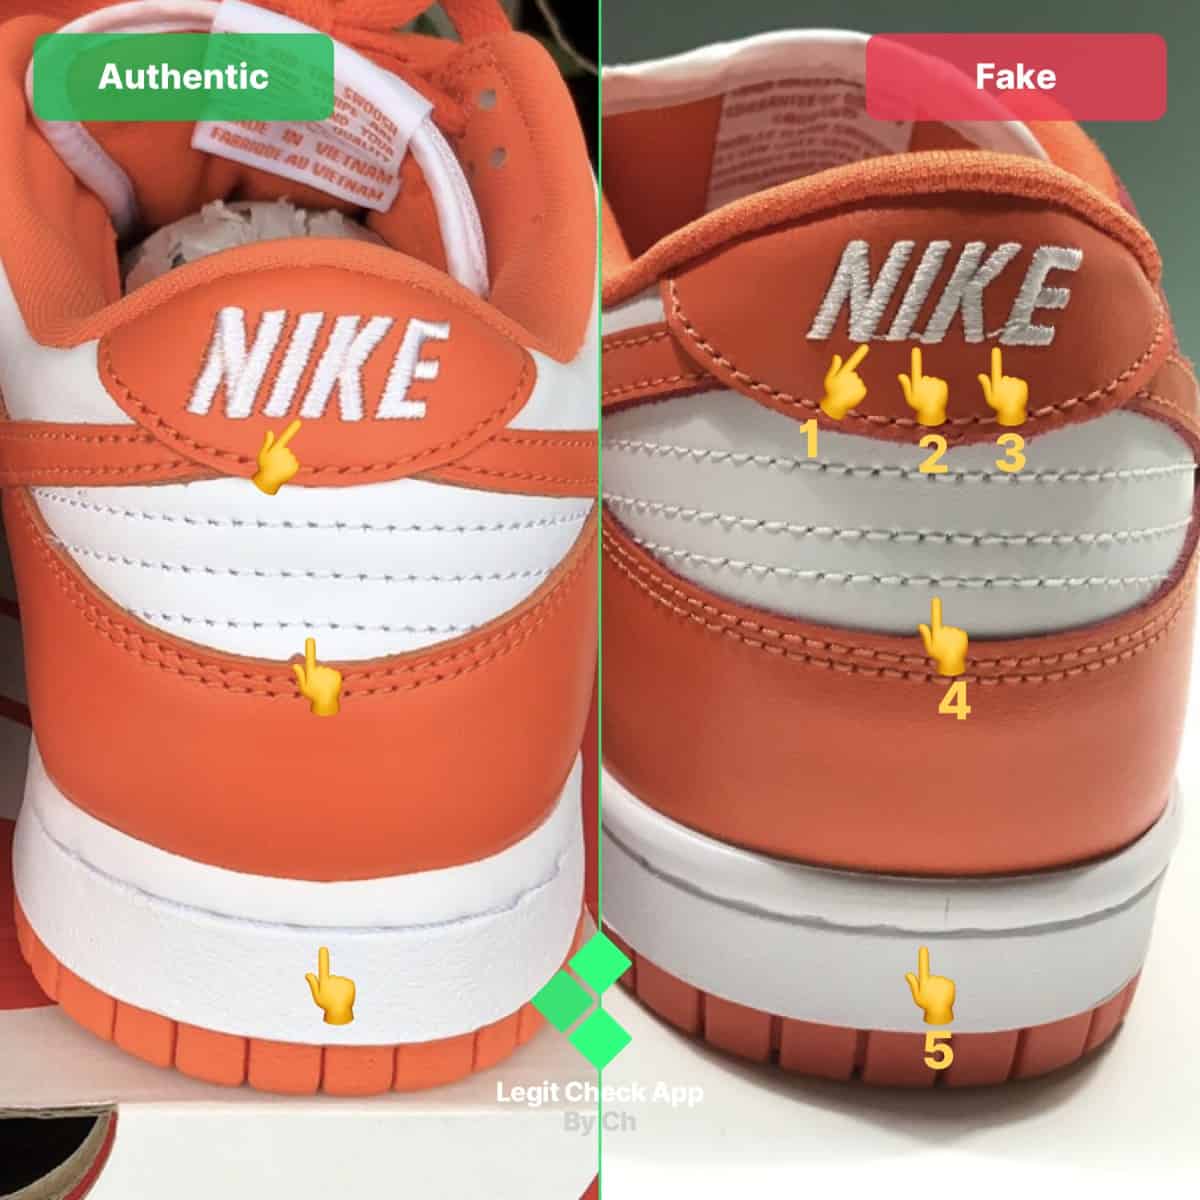 How To Spot Fake Nike Dunk Low (All Colourways) - Legit Check By Ch